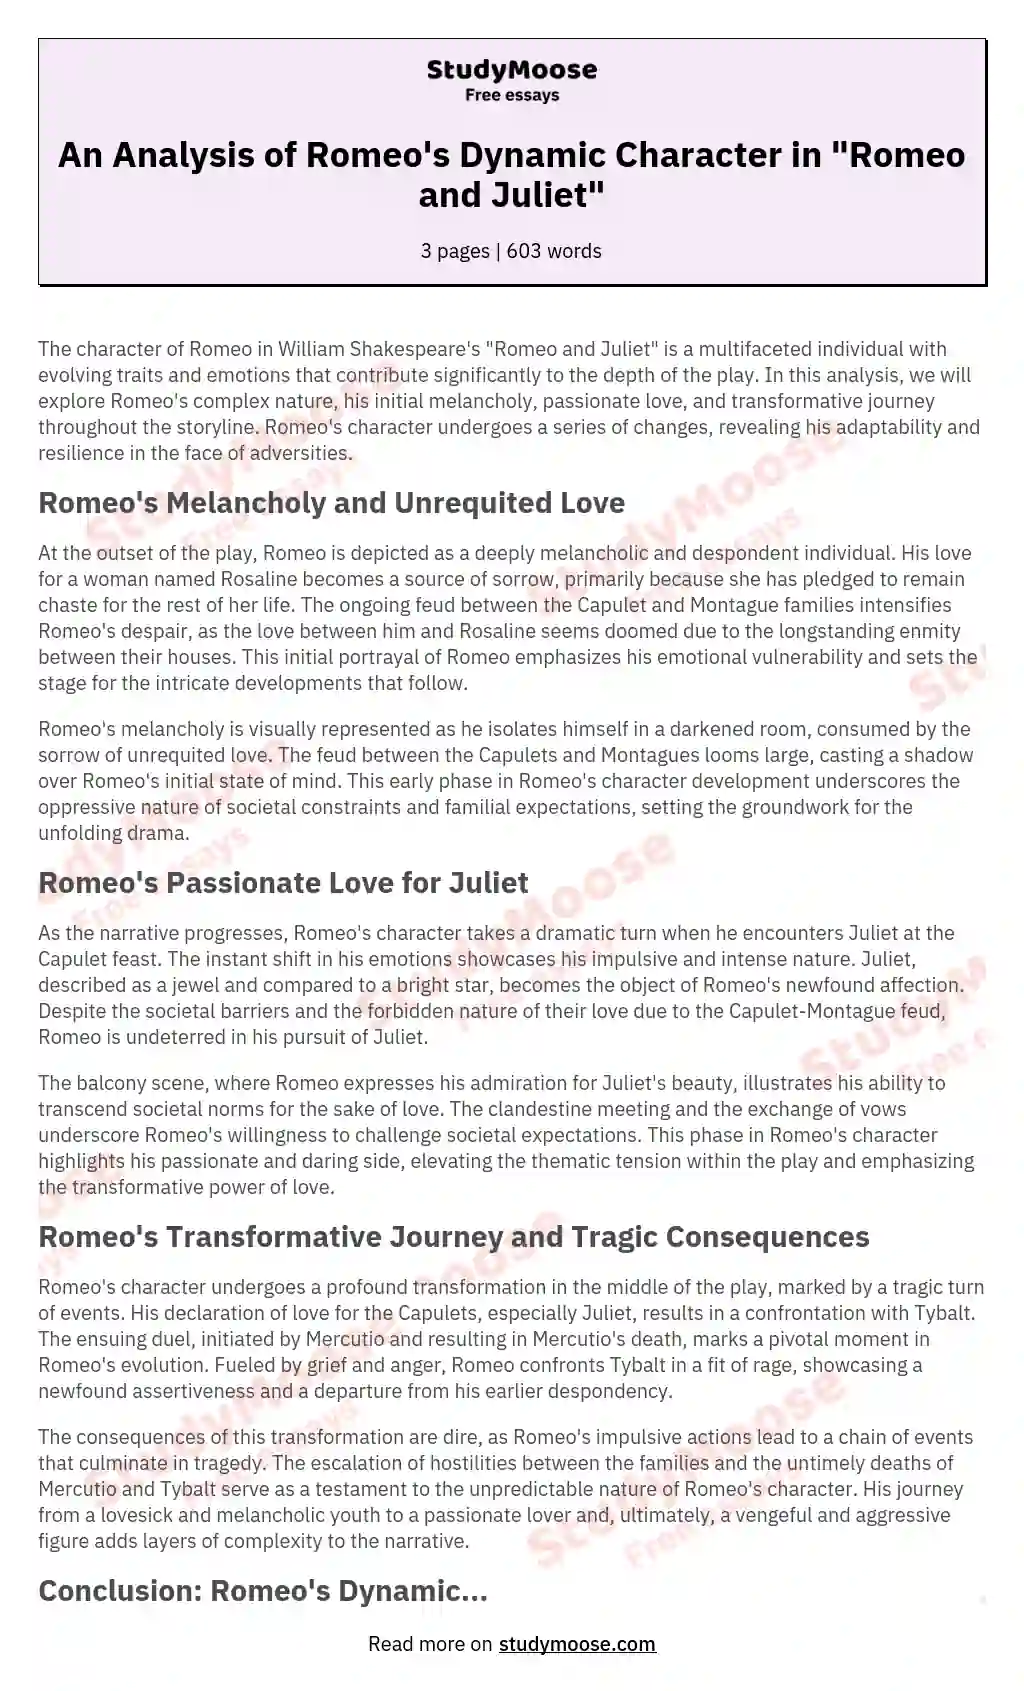 An Analysis of Romeo's Dynamic Character in "Romeo and Juliet" essay